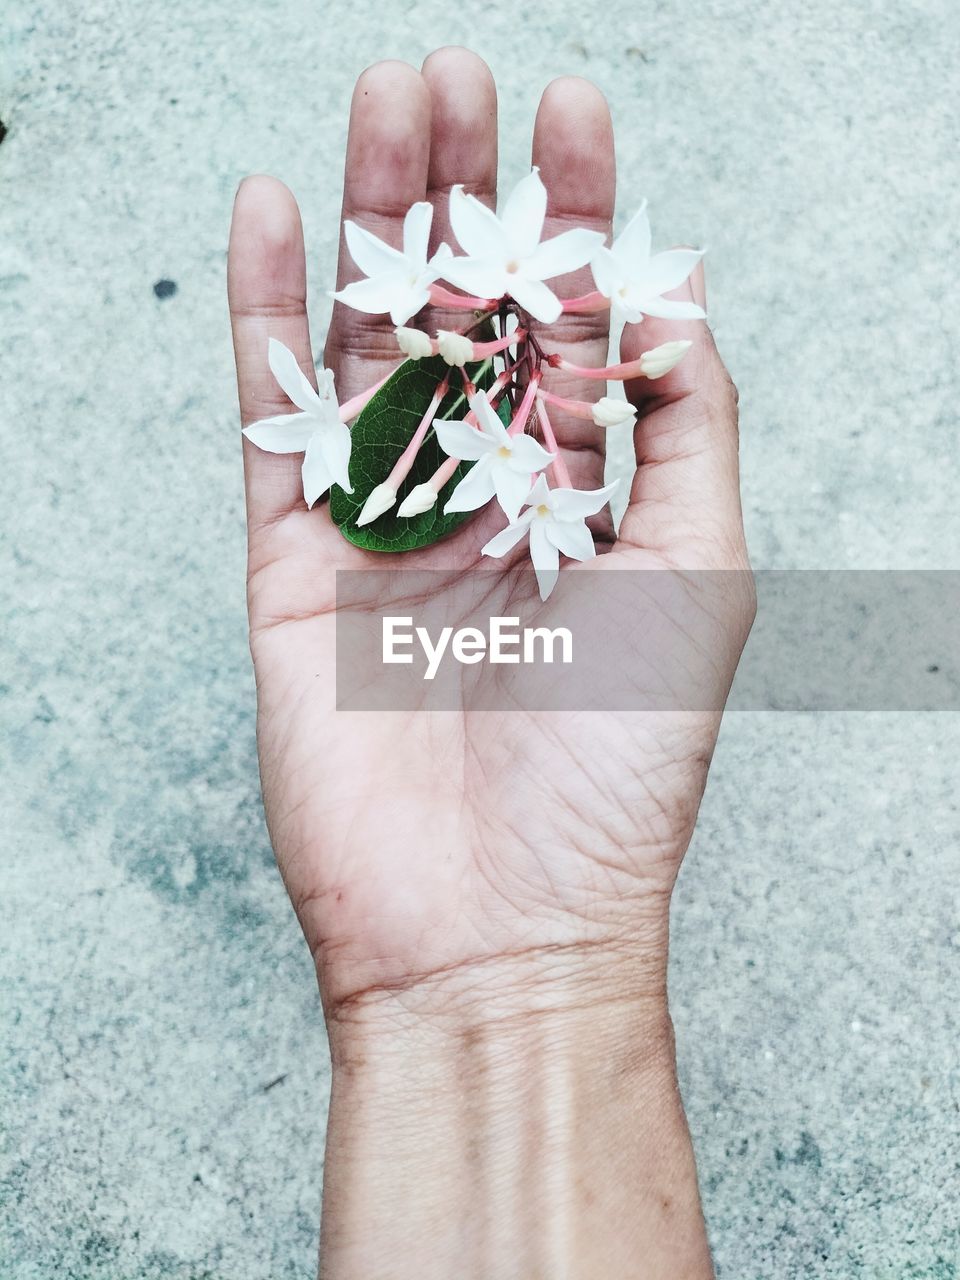 hand, one person, finger, holding, flower, high angle view, nail, close-up, plant, petal, personal perspective, nature, day, pink, limb, spring, flowering plant, ring, outdoors, jewellery